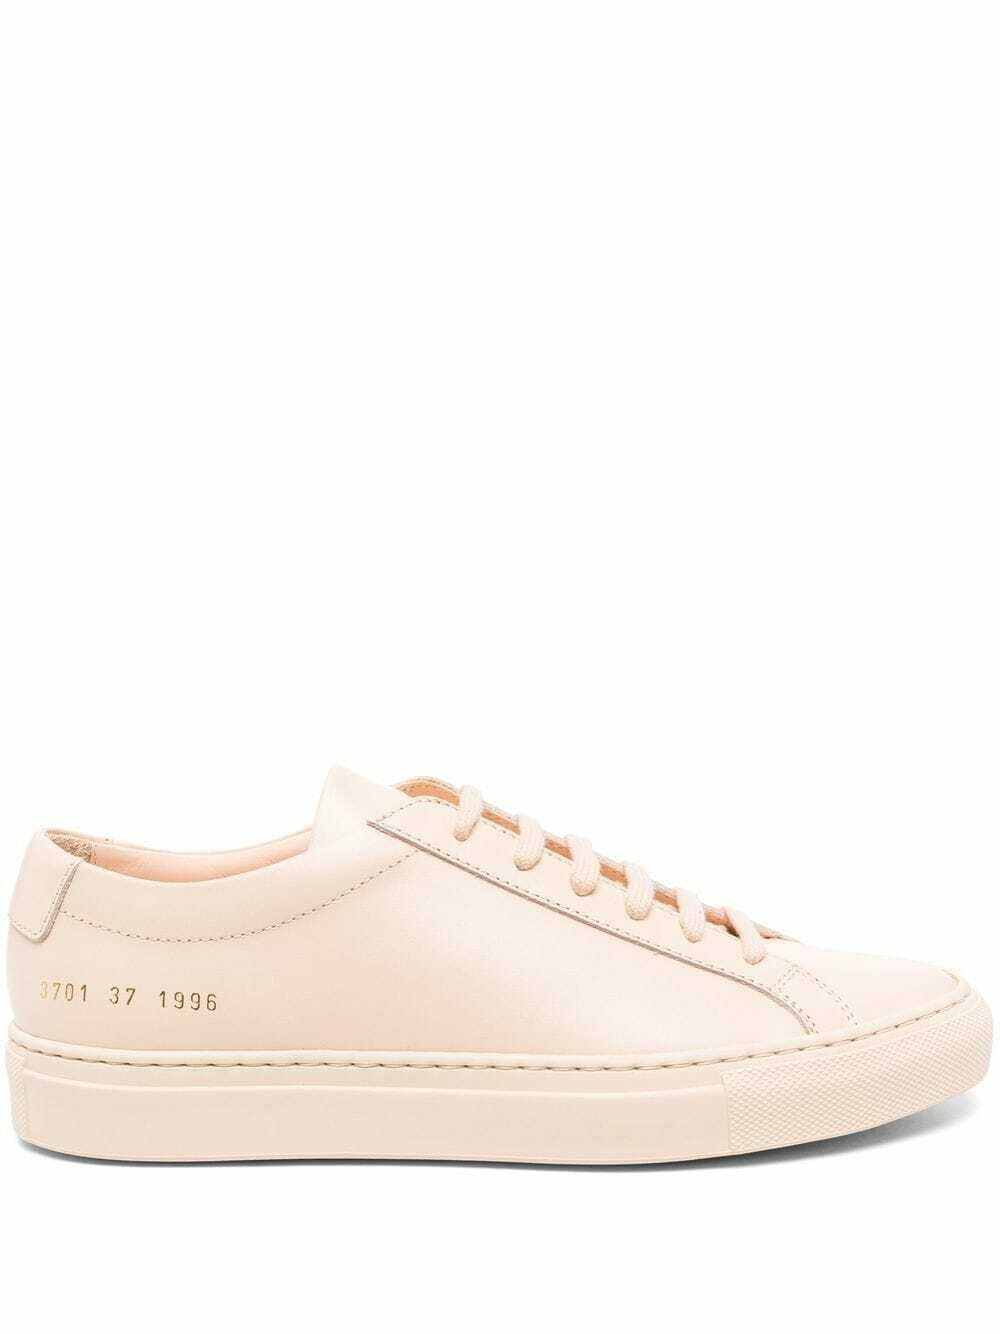 Photo: COMMON PROJECTS - Original Achilles Low Leather Sneakers